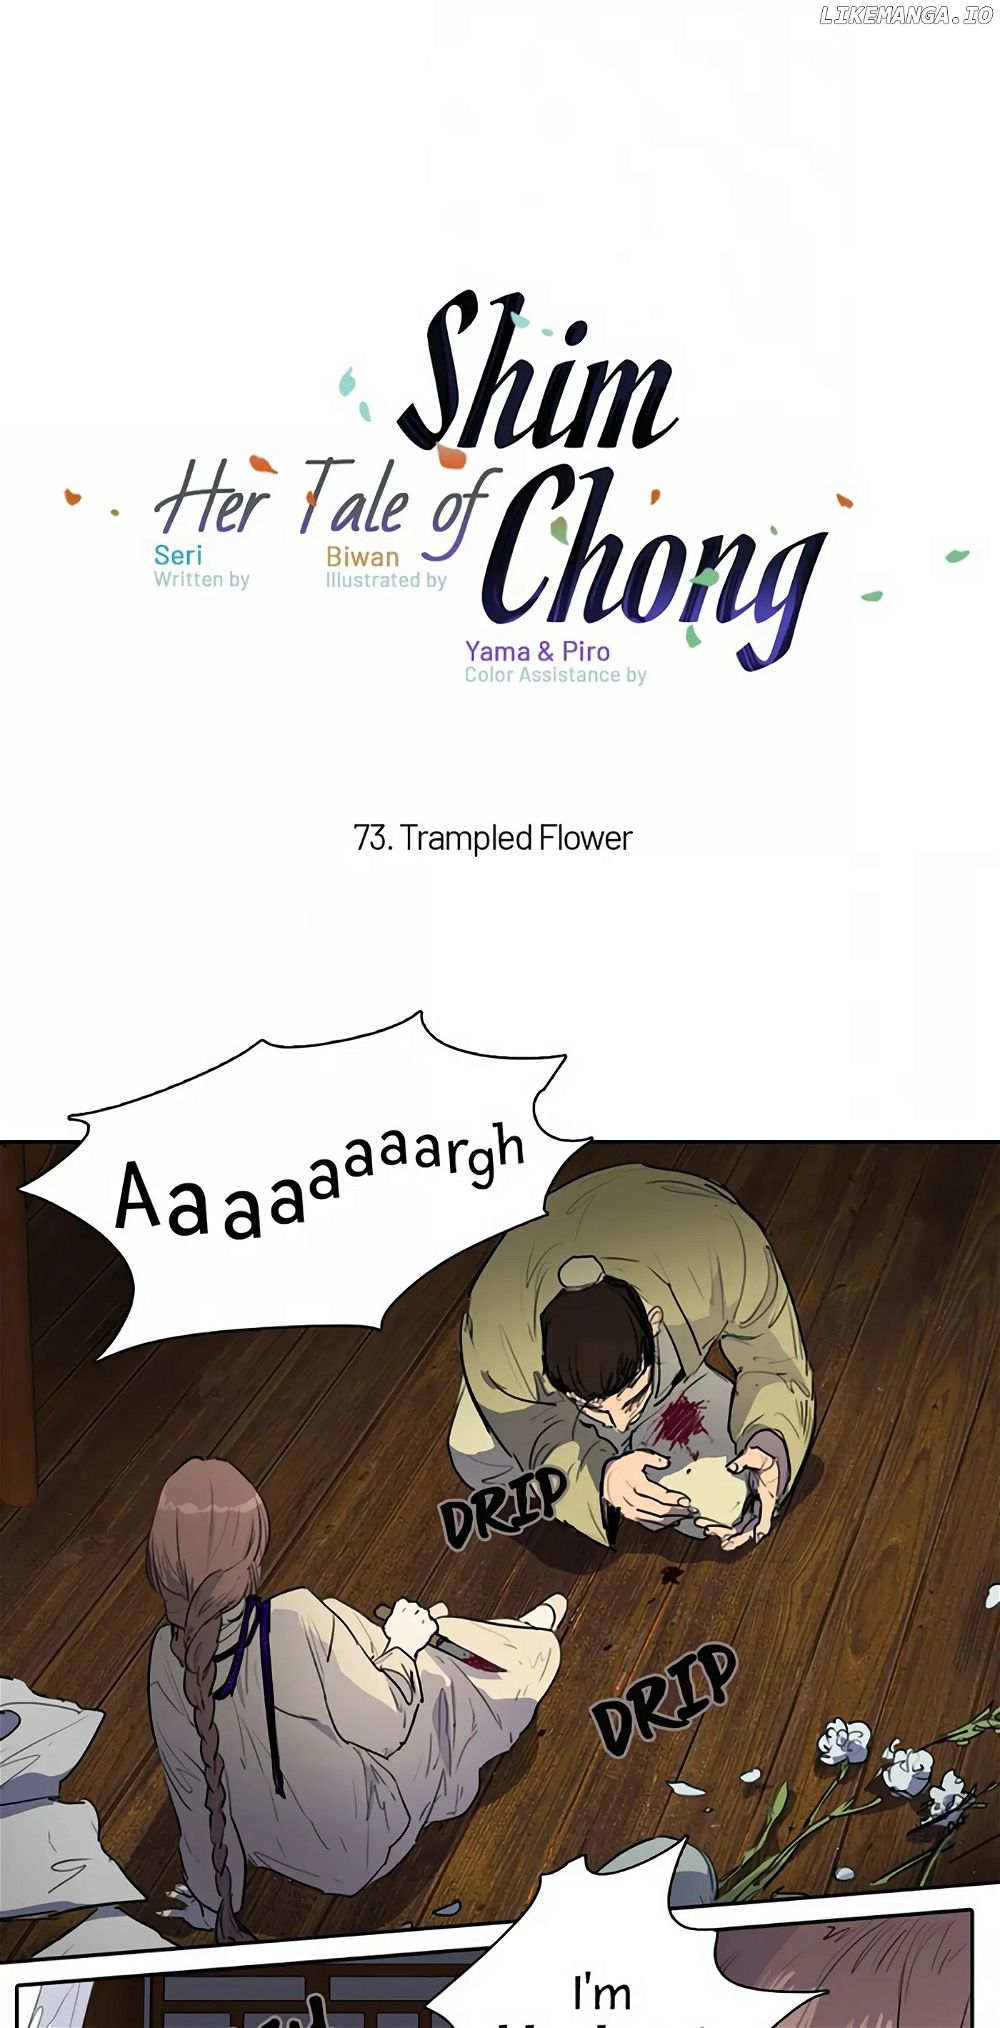 Her Tale of Shim Chong Chapter 73 - Page 2